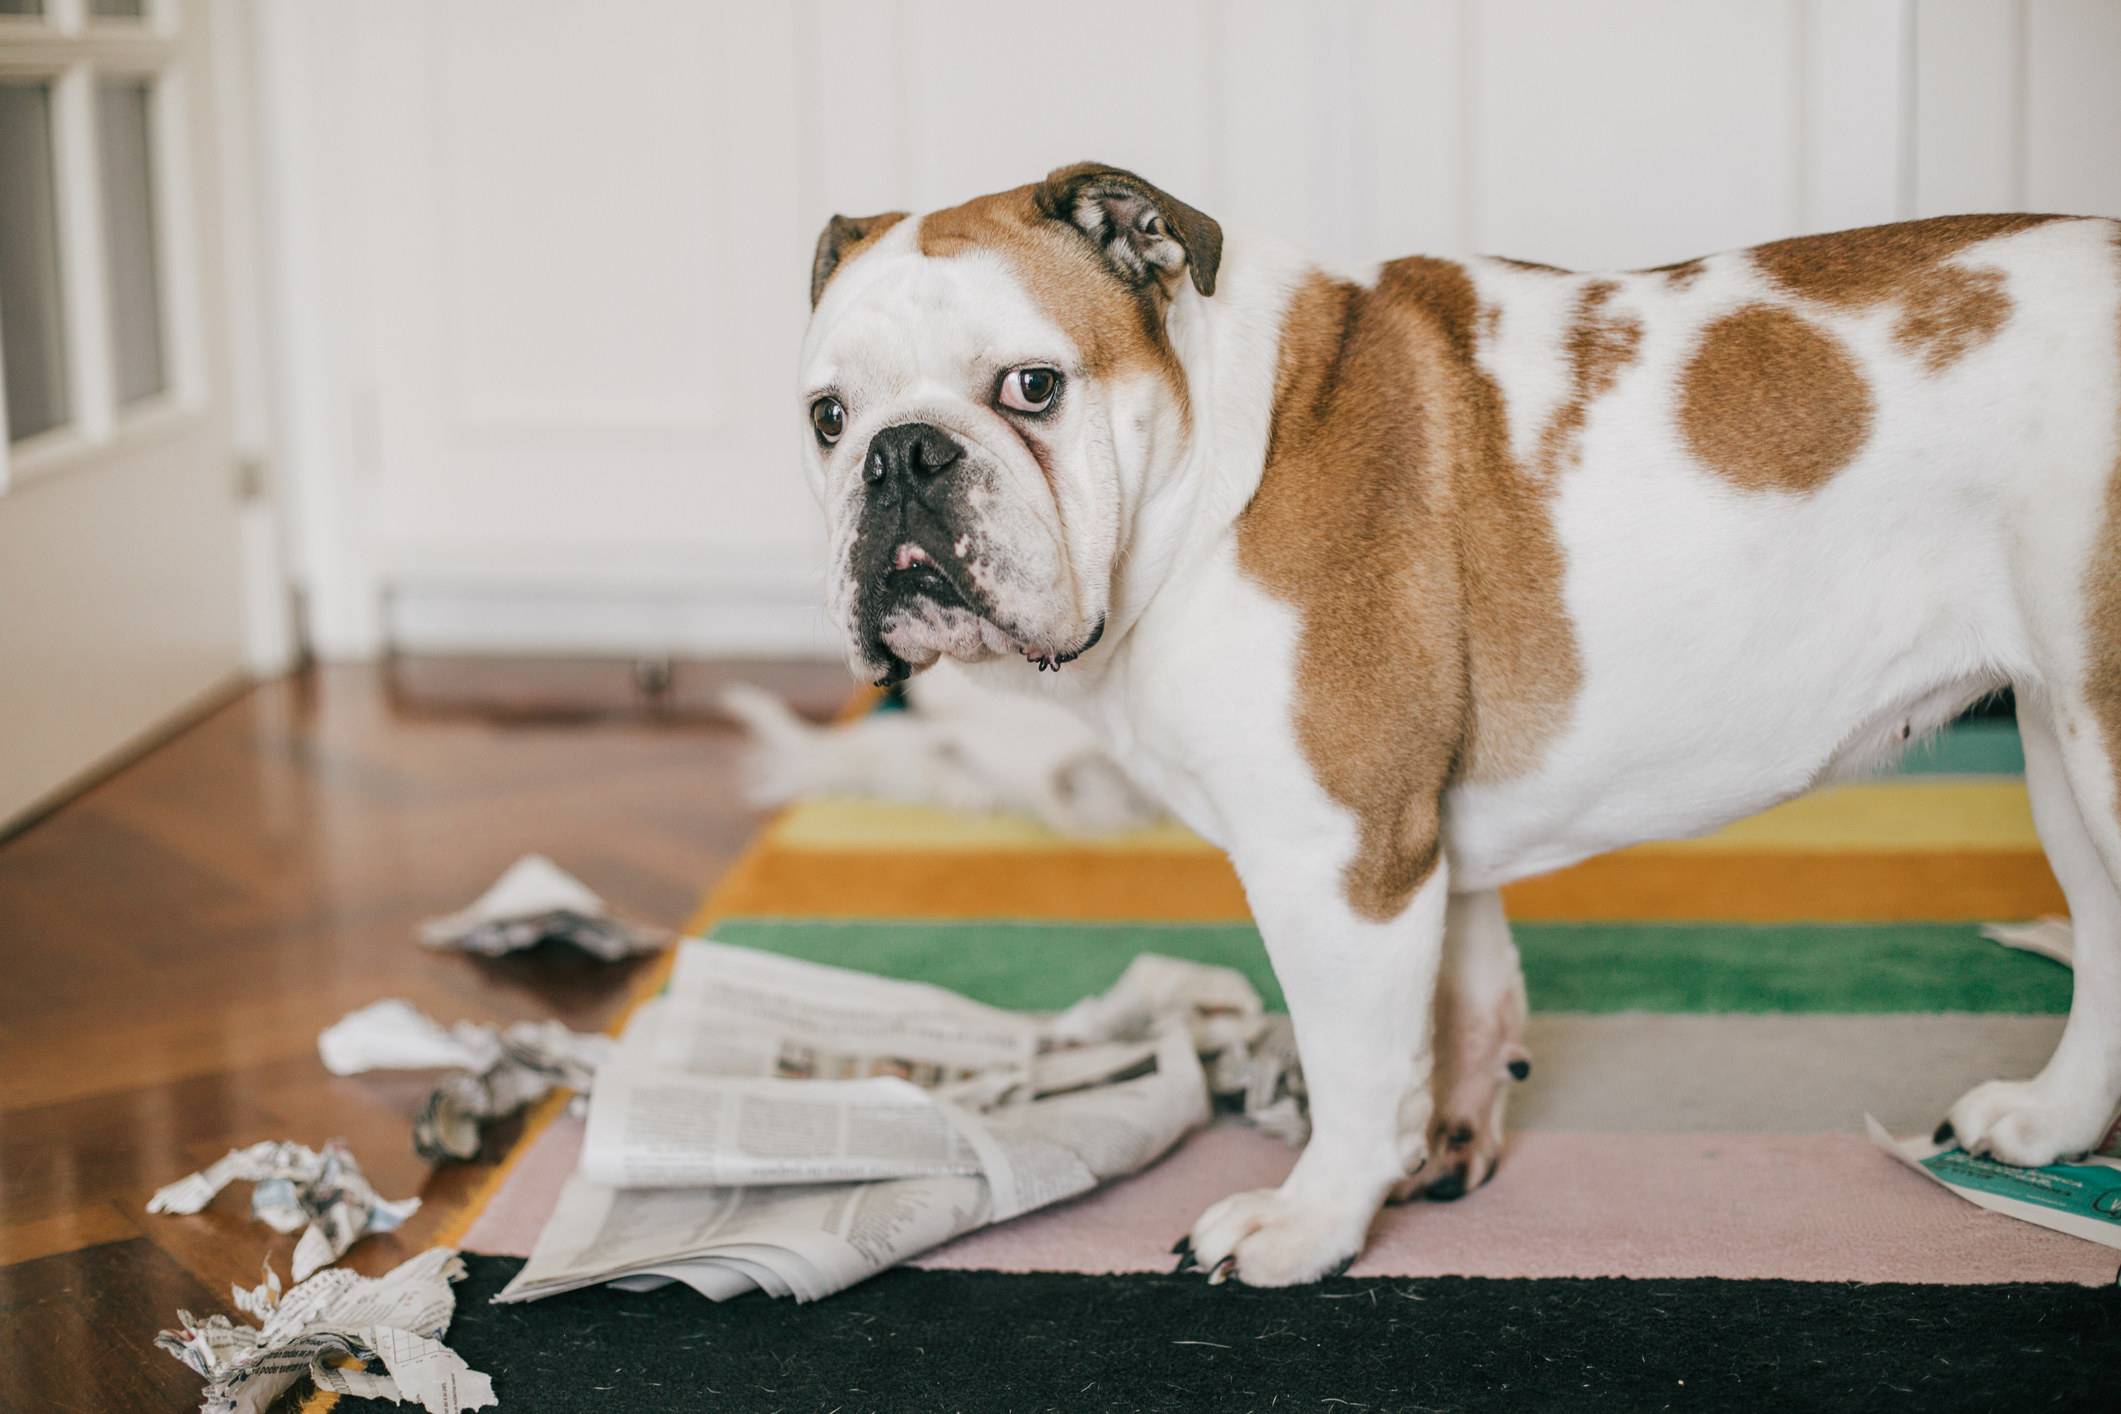 Dog standing in front of some newspaper it bit into while alone at home

bite some newspaper while alone at home